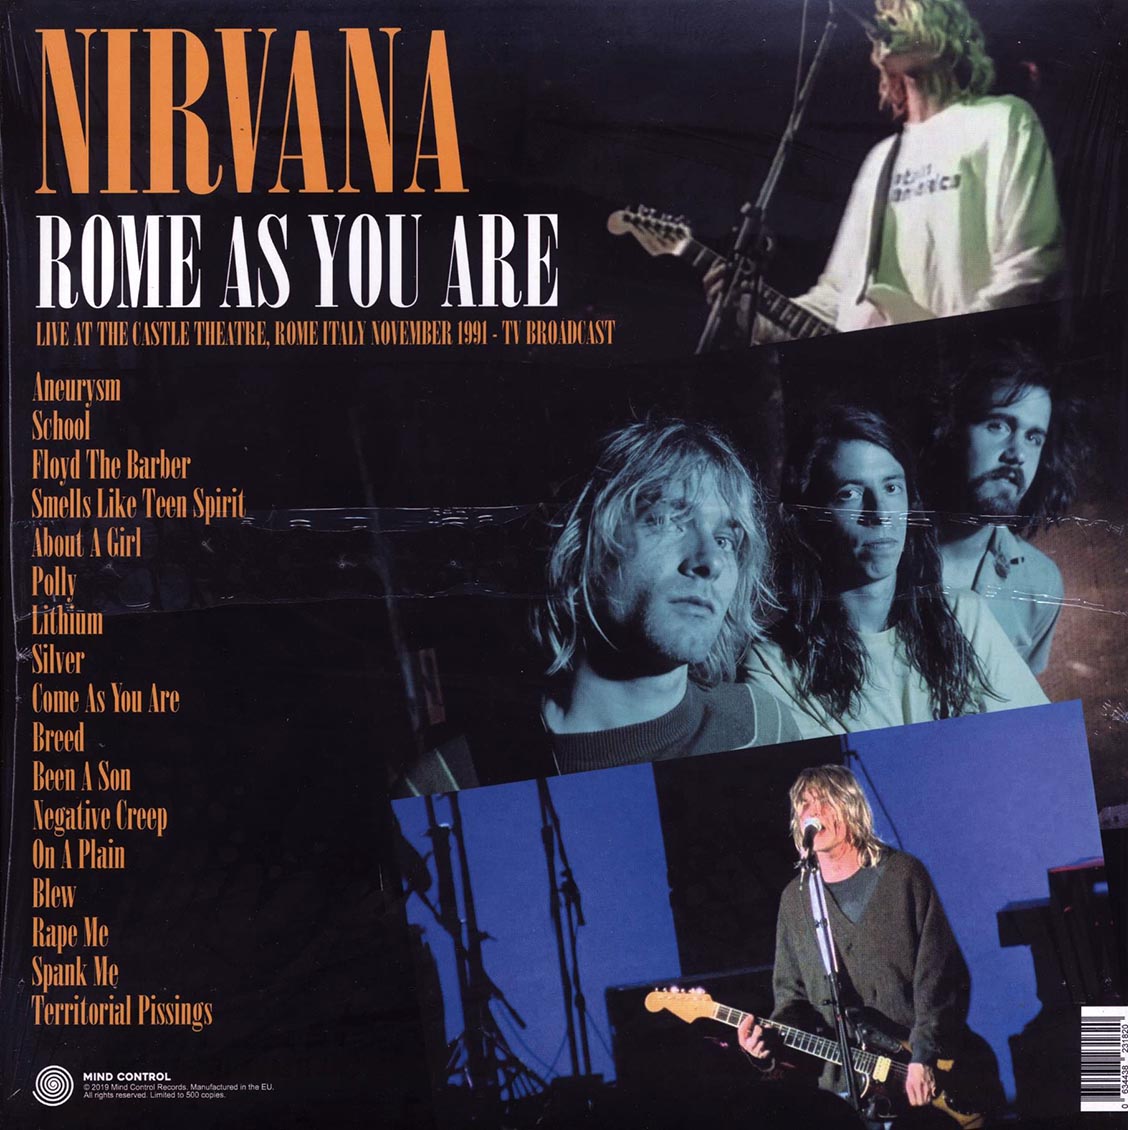 Nirvana - Rome As You Are: Live At The Castle Theatre, Rome, Italy, November 1991 TV Broadcast (ltd. 500 copies made) - Vinyl LP, LP